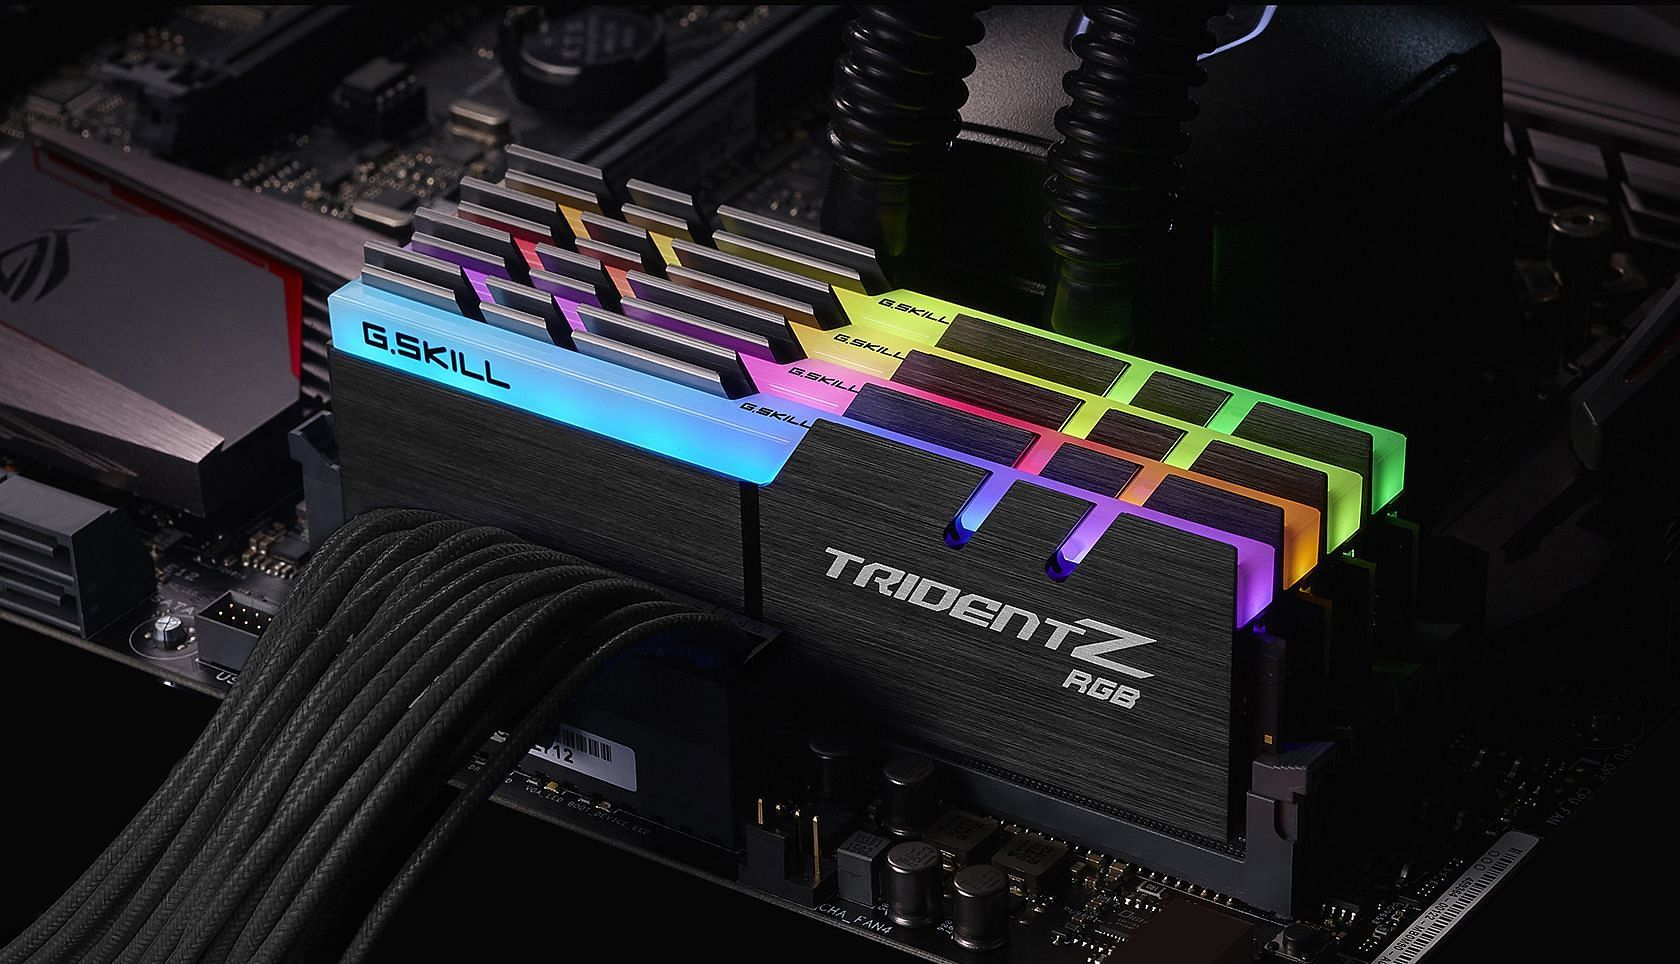 RAM speed does not make much of a difference for gamers (Image via TridentZ)